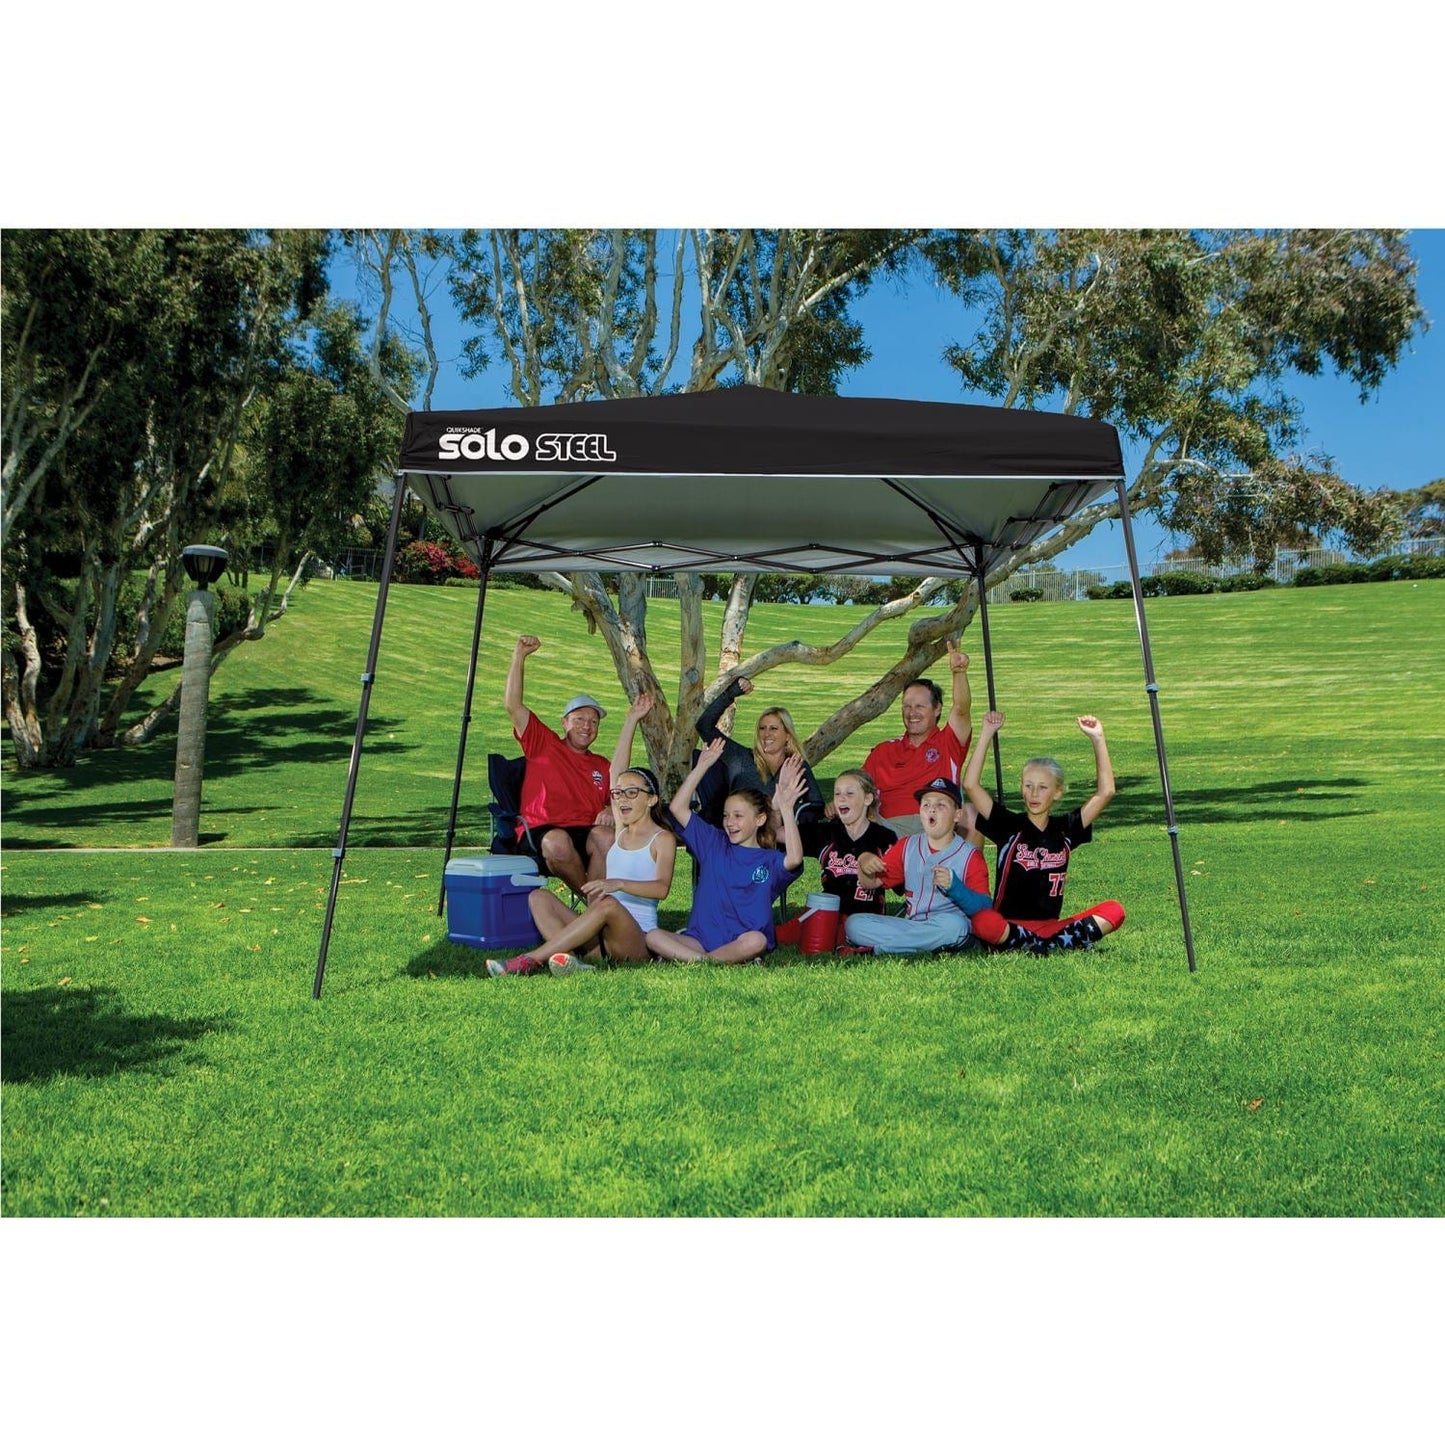 The Fulfiller Pop Up Canopies Quik Shade | Solo Steel 72 11' x 11' Slant Leg Canopy - Black 164296DS